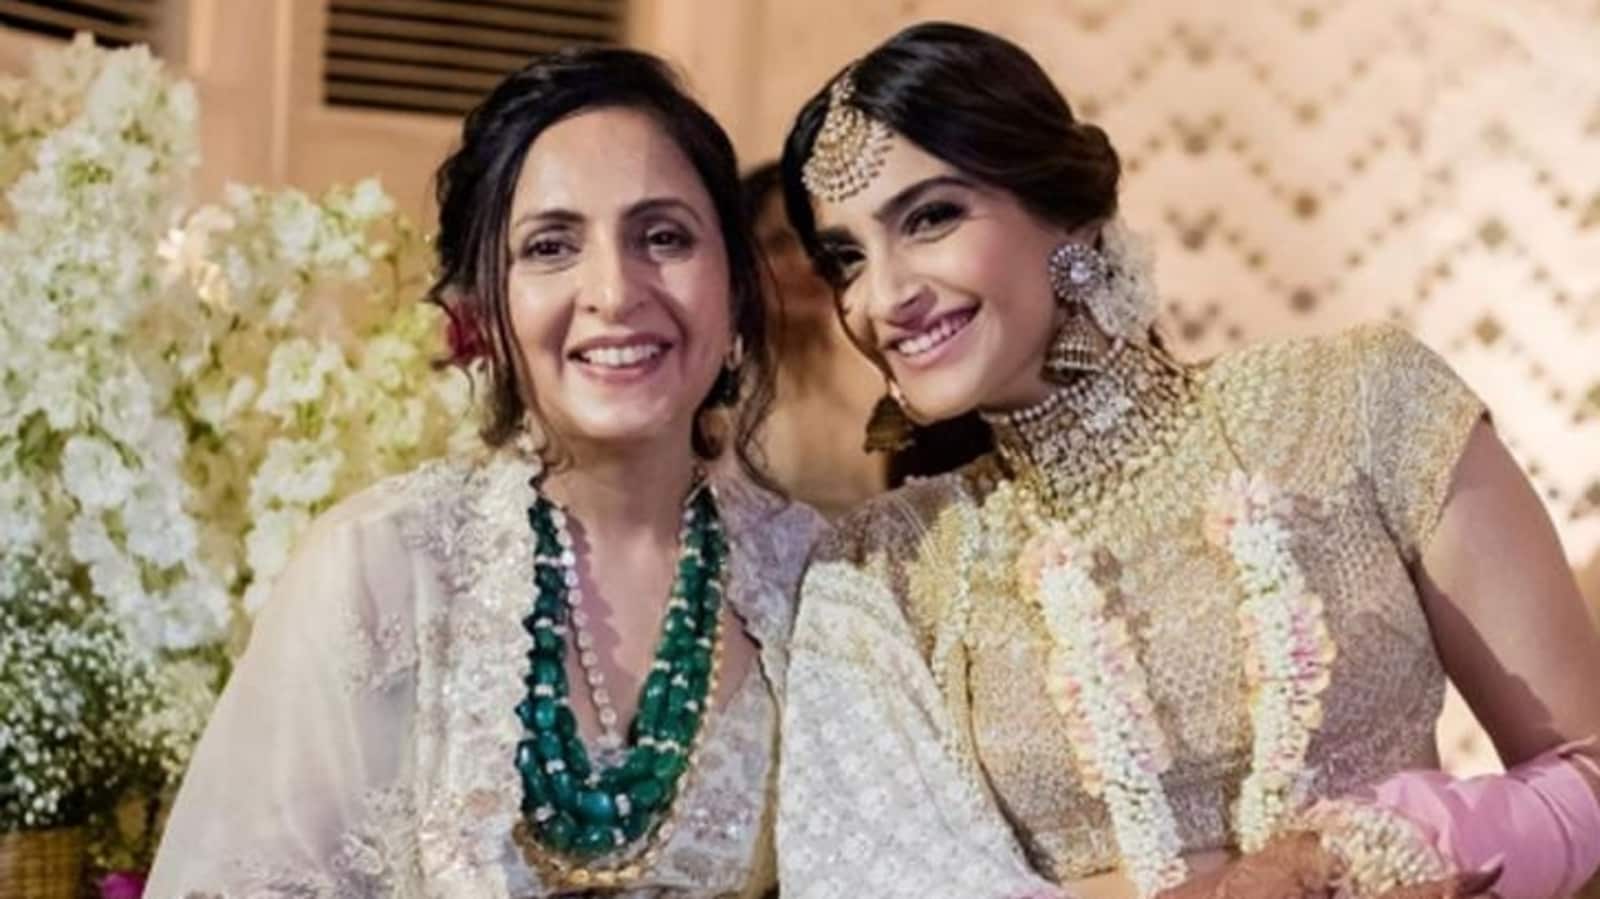 Sonam Kapoor’s mother-in-law reacts to her pregnancy, shars pic of her baby bump: ‘Super excited to be a Dadi soon’